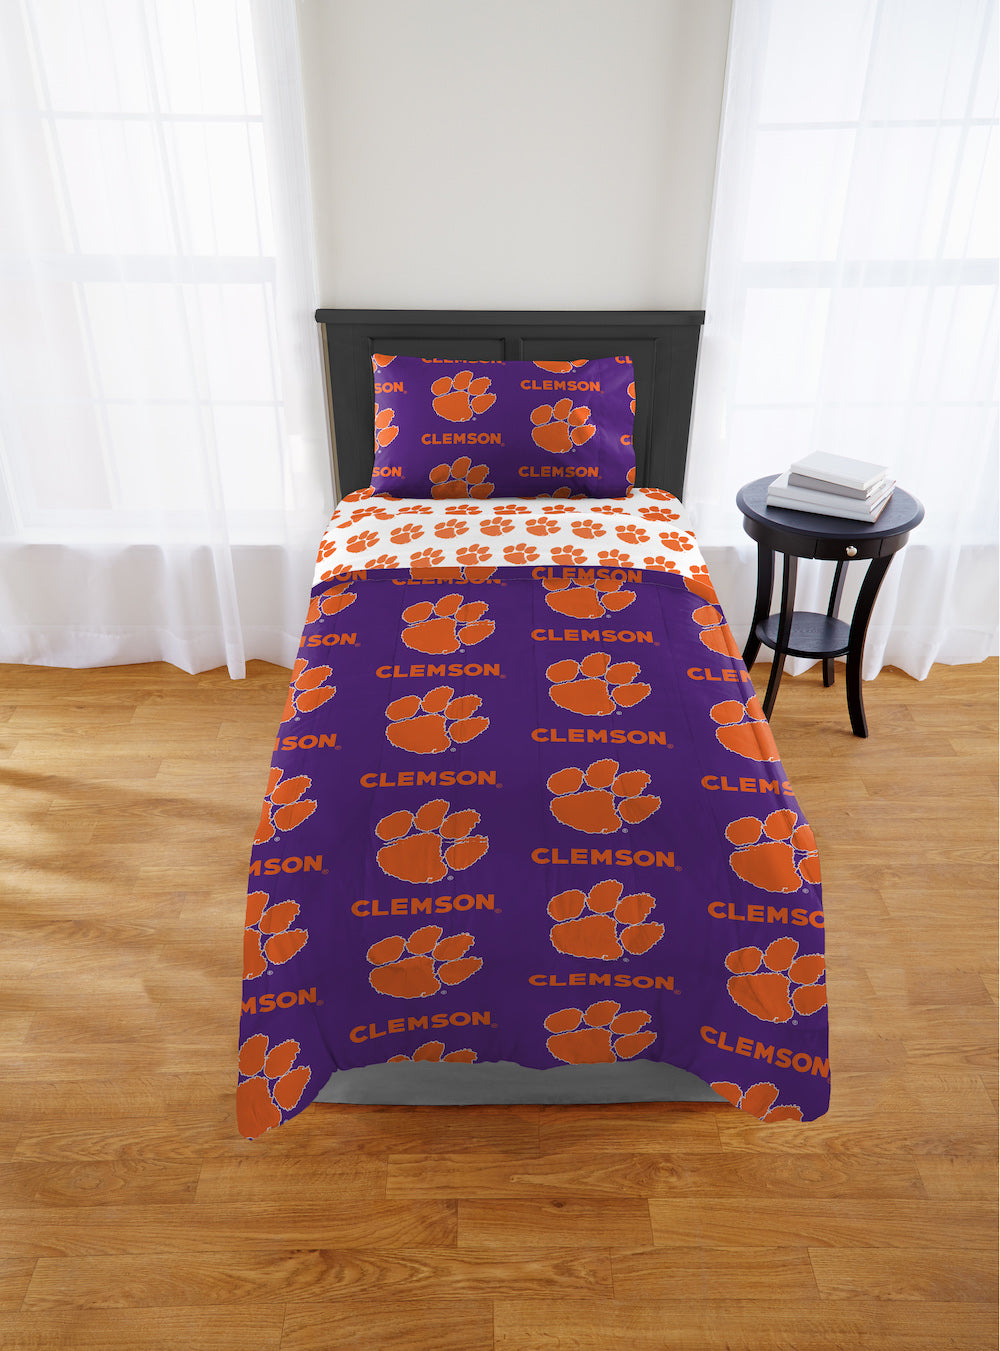 Clemson Tigers twin size bed in a bag